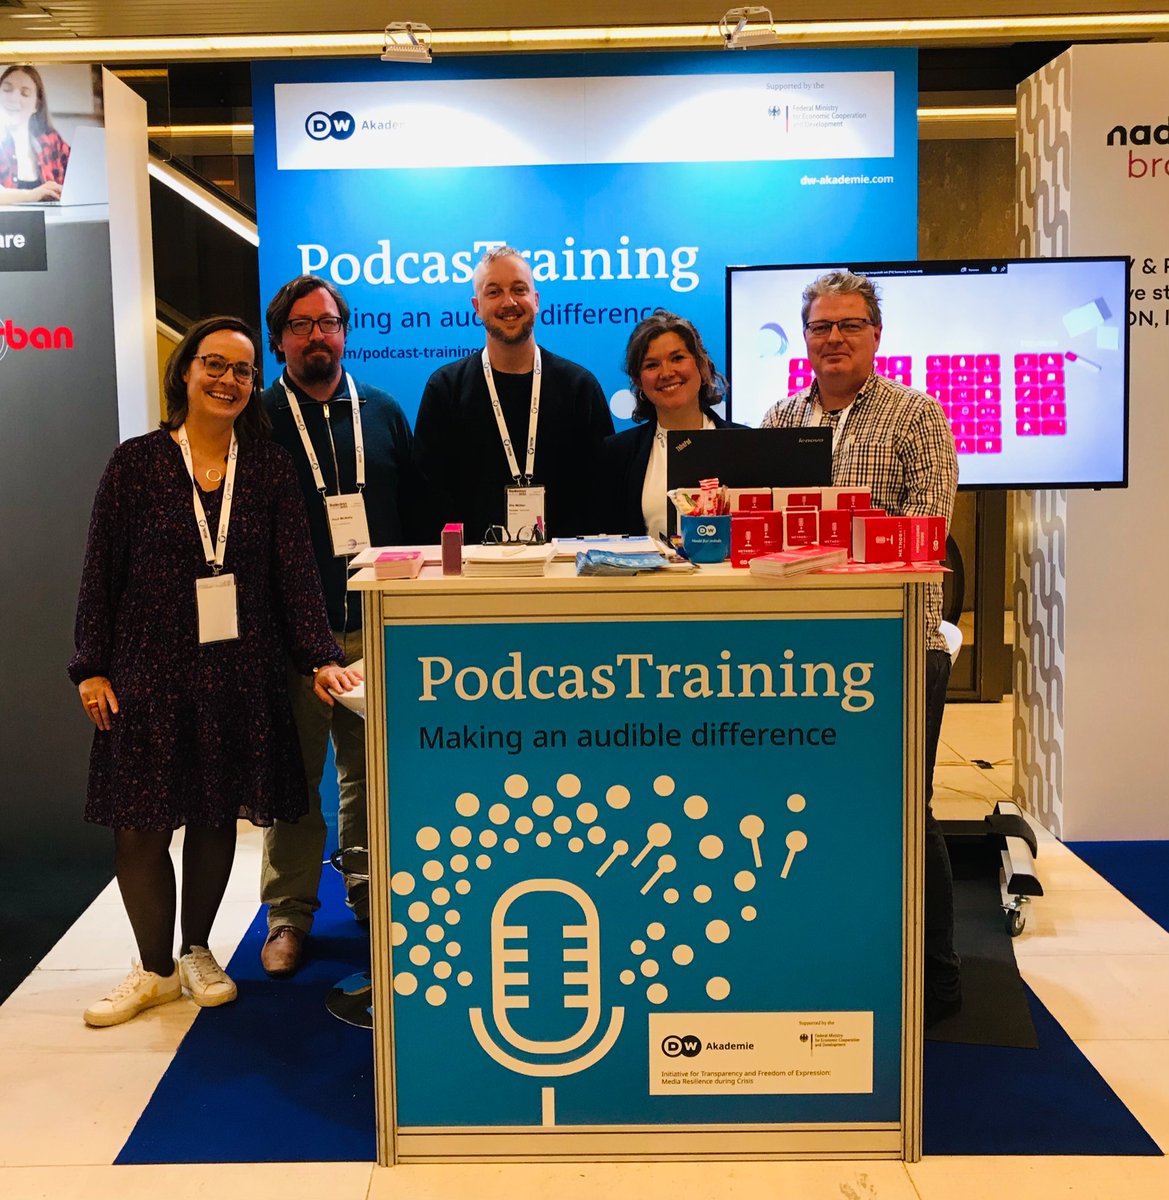 Day 2 @RadiodaysEurope in Prague. Come and say hi! Our team from @dw_akademie @MethodKit @alibipod look forward to meeting you. #RDE23